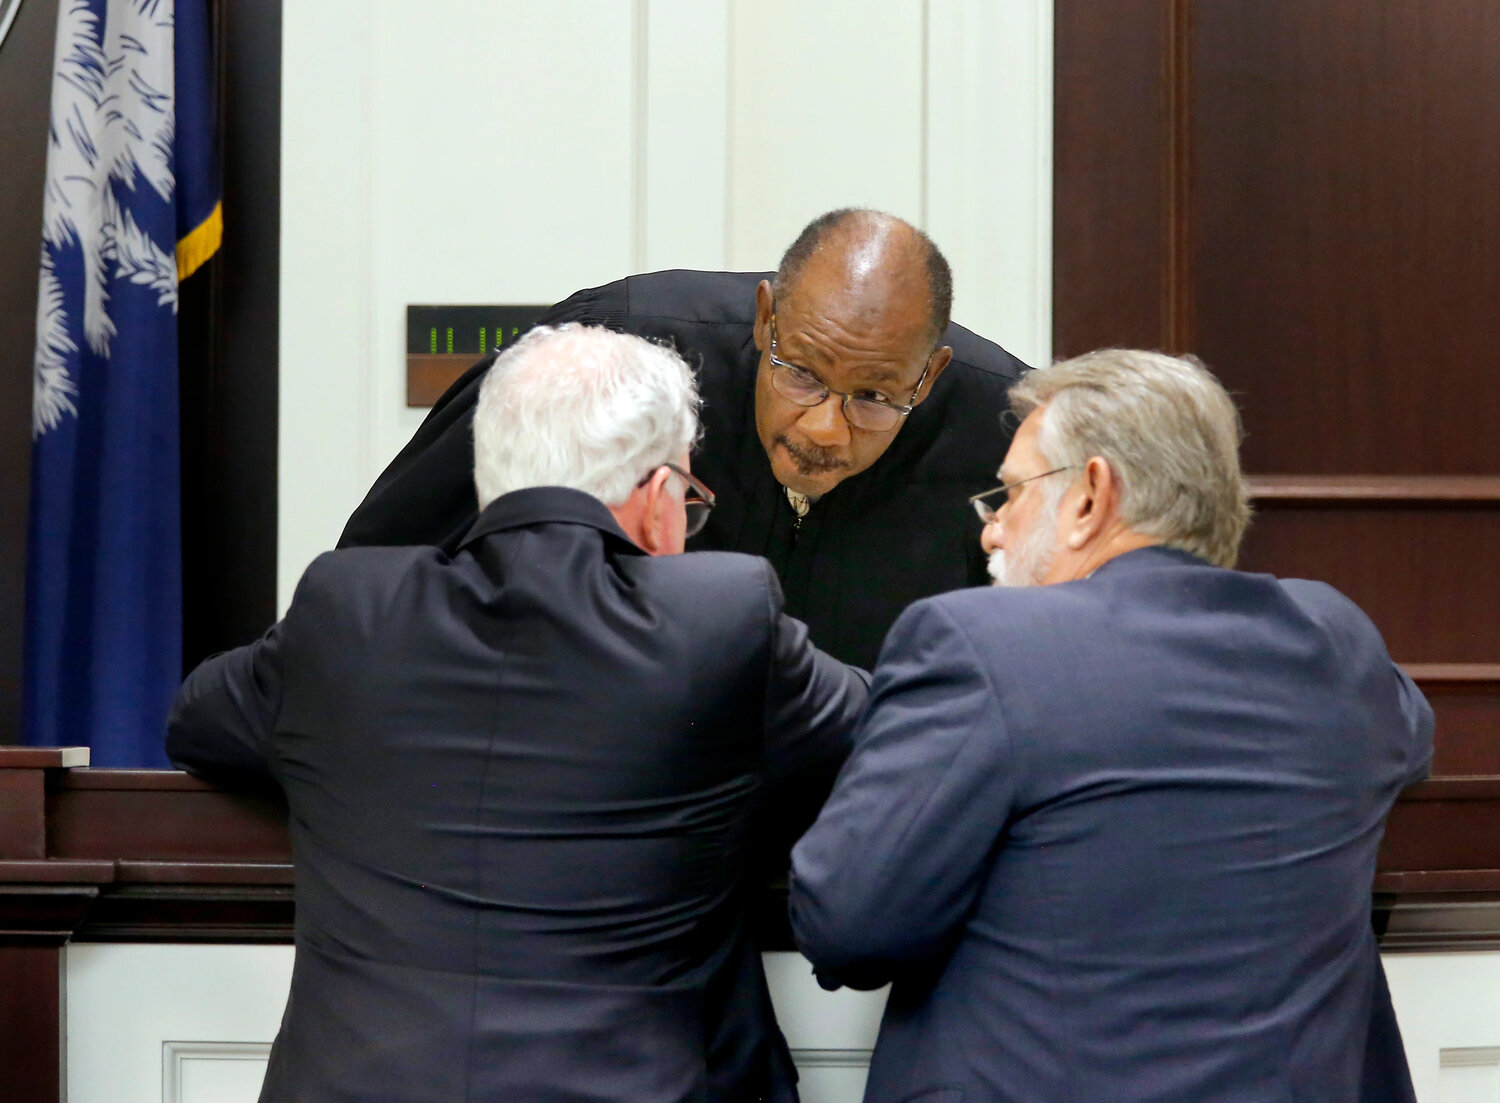 Defense attorney Andy Savage and Deputy Solicitor Bruce DuRant confer with Circuit Judge Clifton Newman during Michael Slager’s murder trial at the Charleston County courthouse. File/Grace Beahm/Staff
By Grace Beahm gbeahm@postandcourier.com